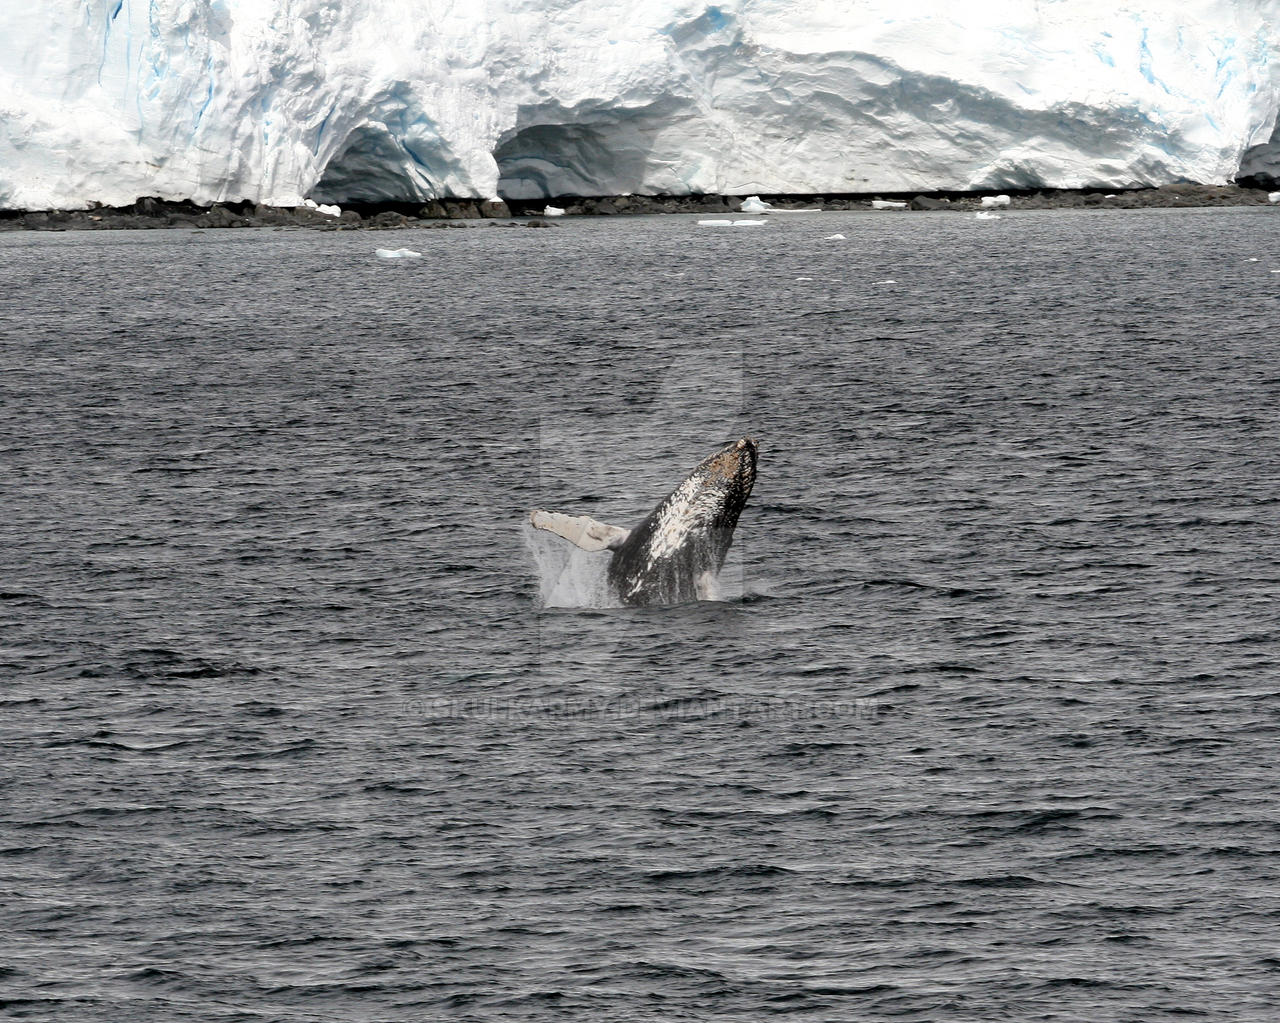 Humpback Whale jumping